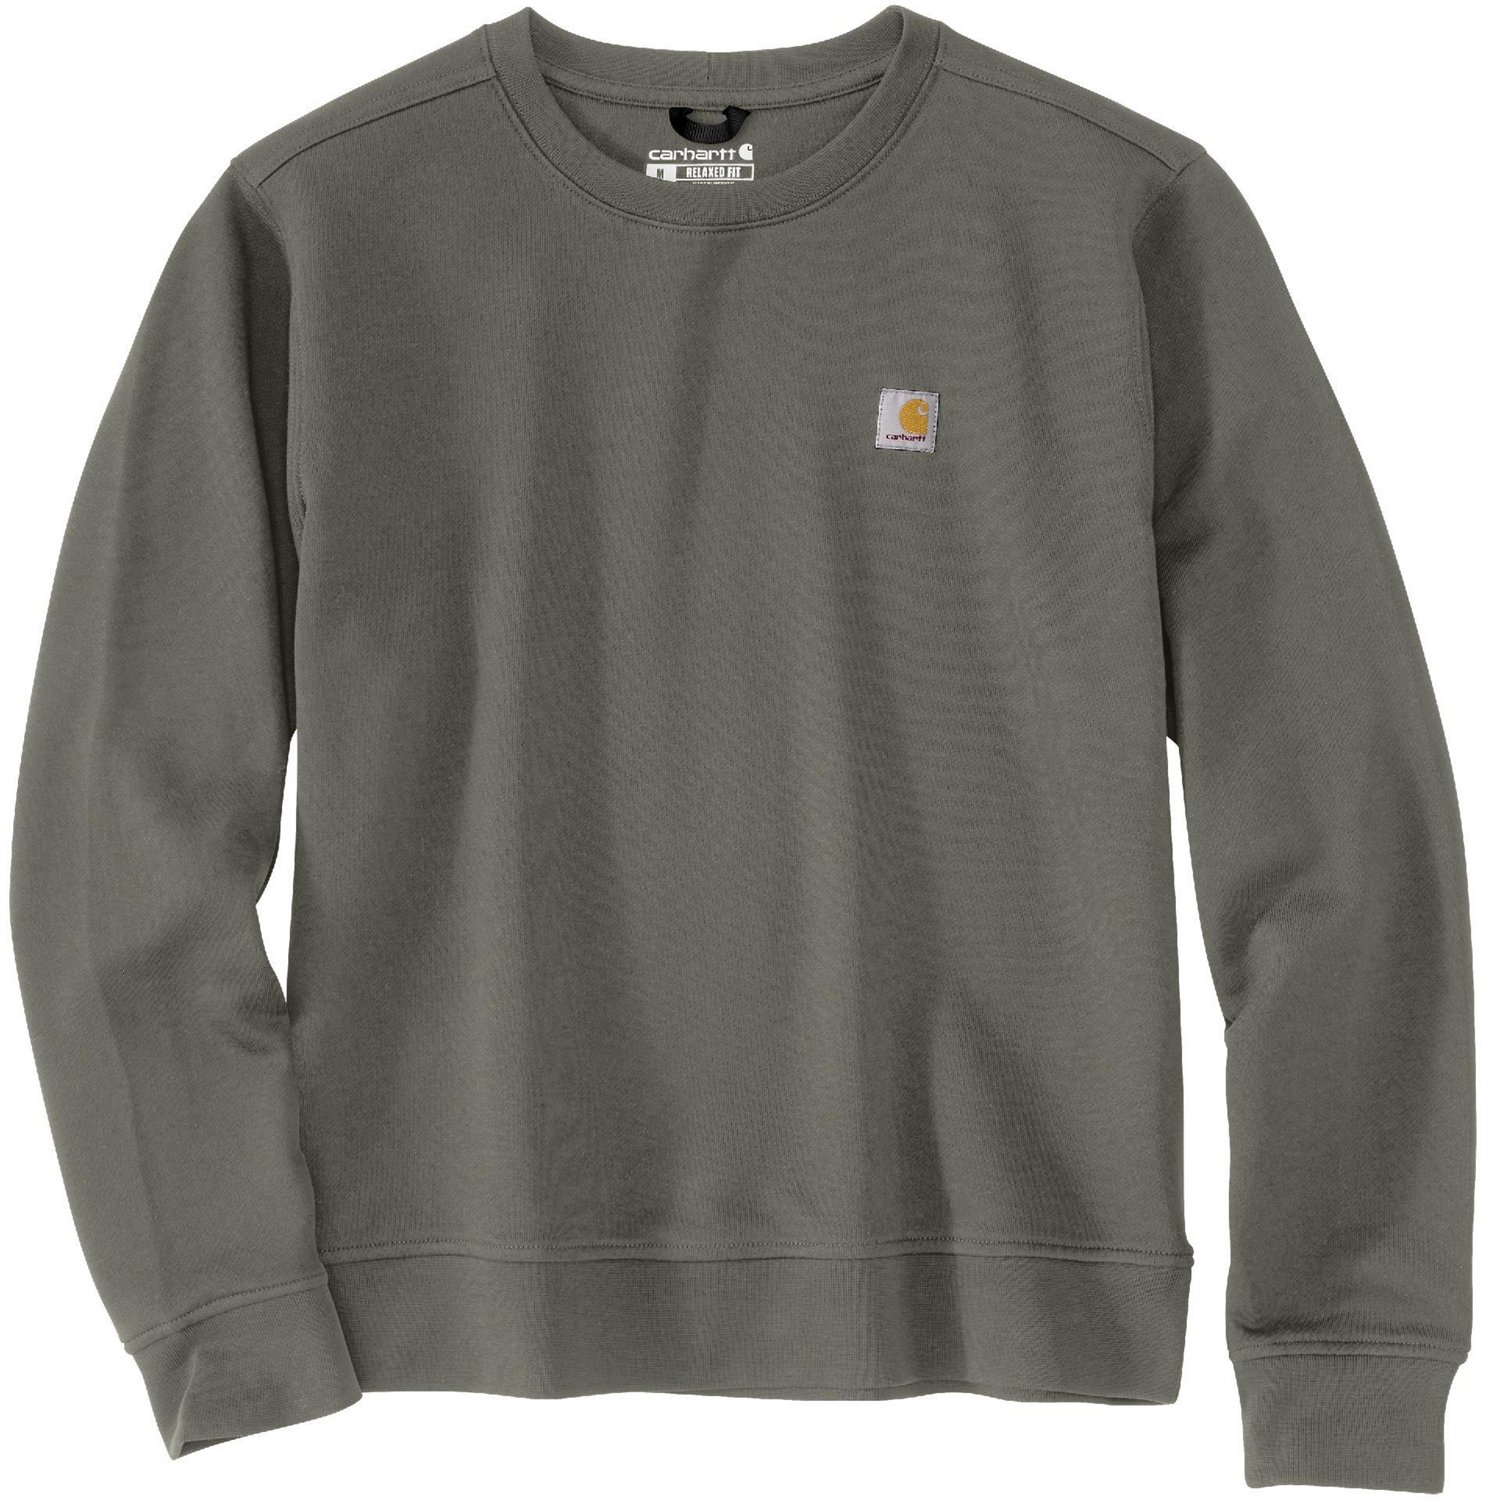 Carhartt Women's Relaxed Fit Midweight French Terry Crew Neck ...